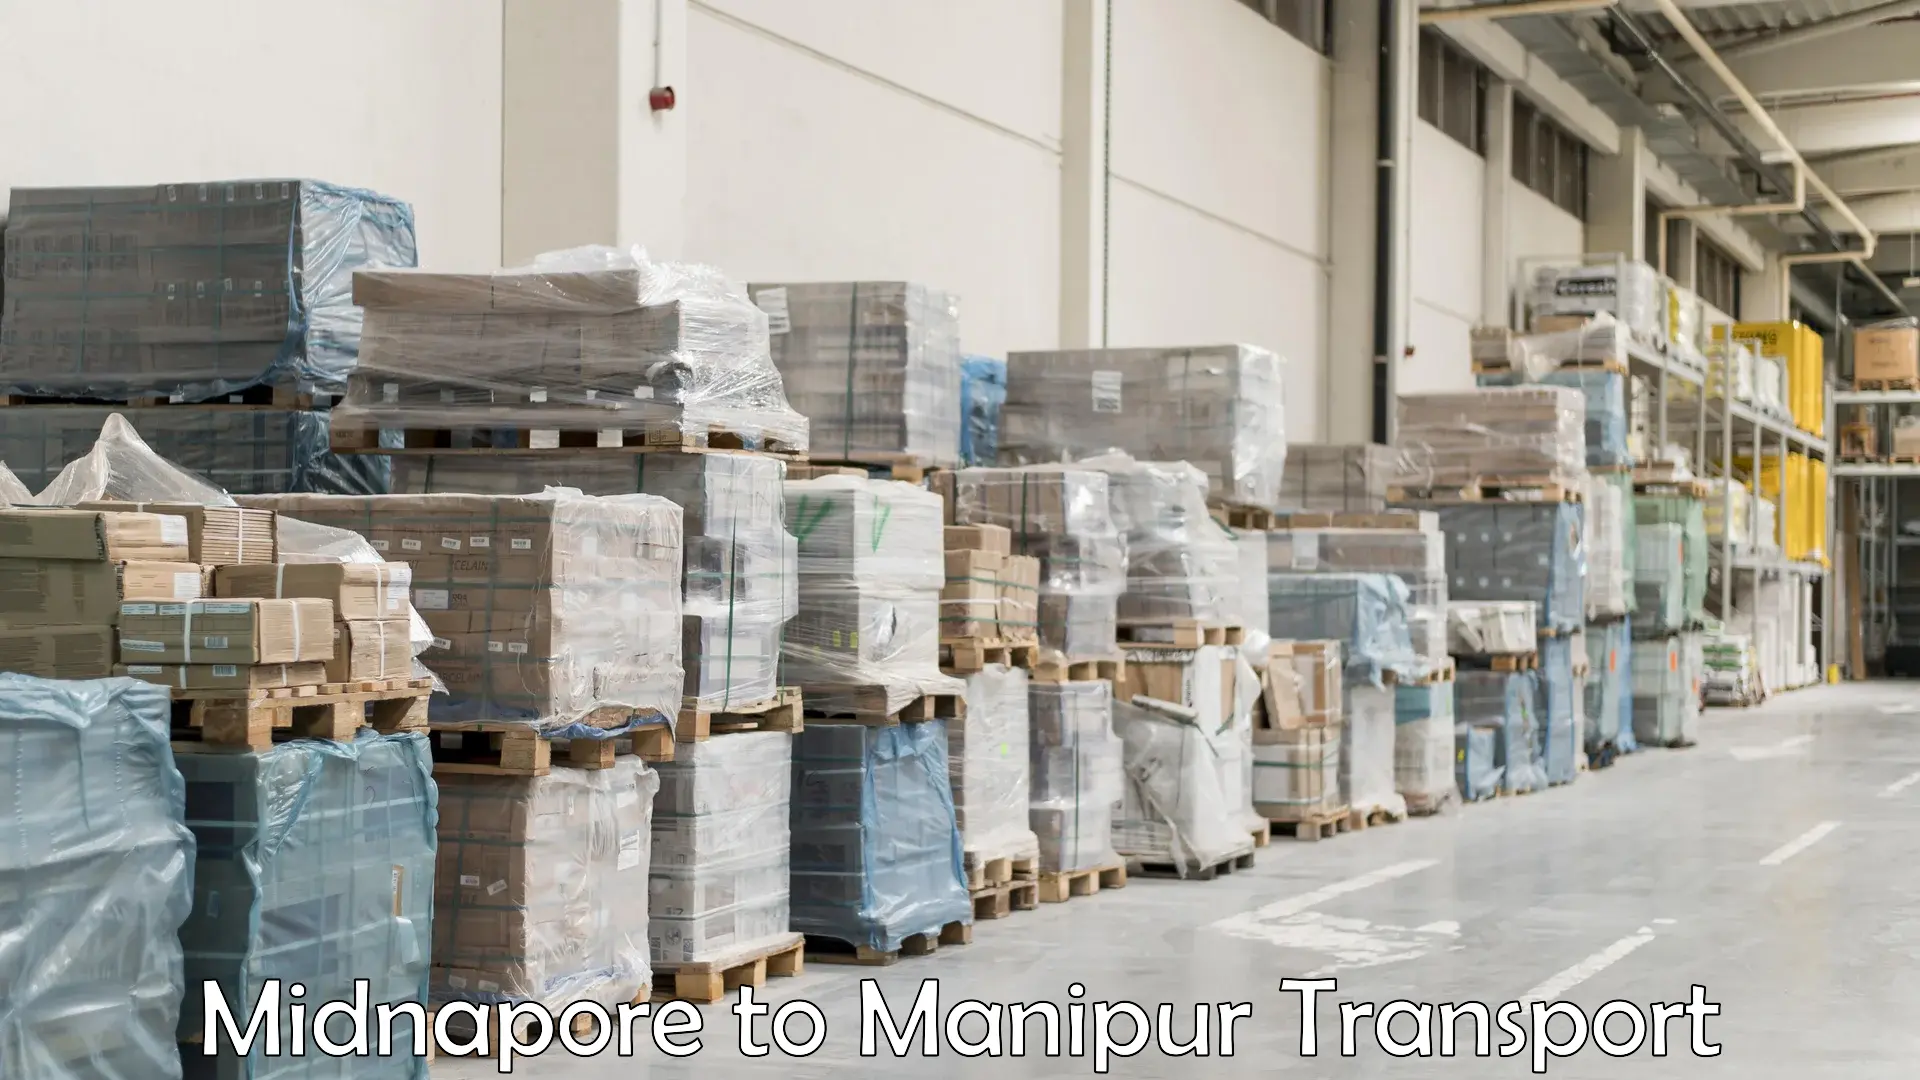 Express transport services Midnapore to Tamenglong